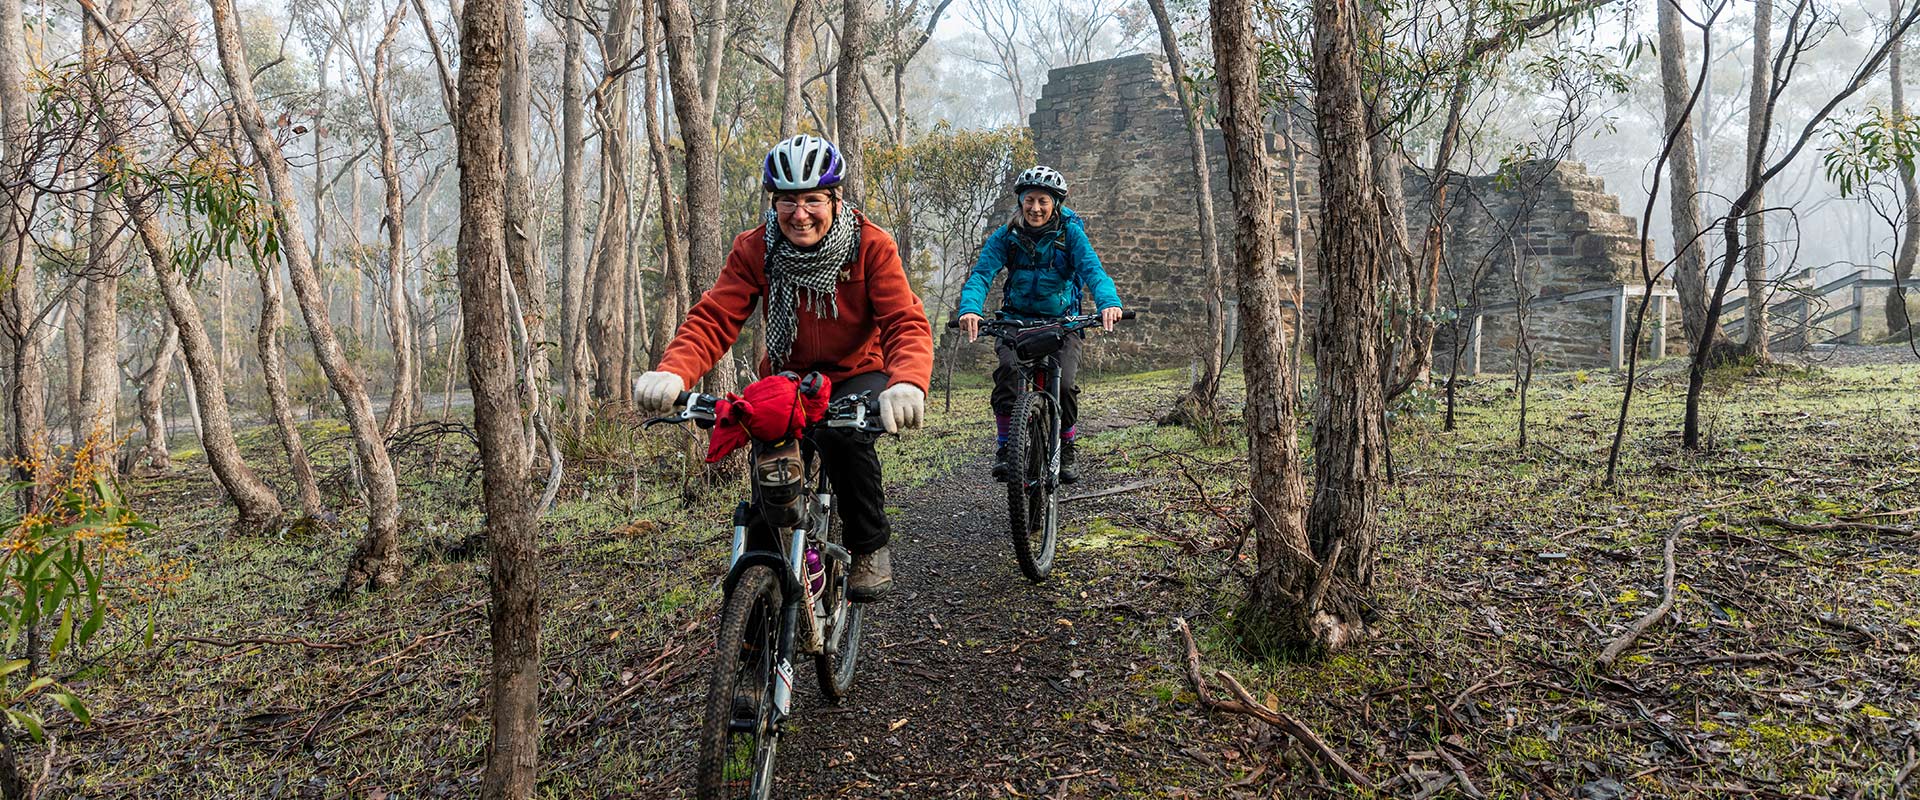 Two females ride mountain bikes past the remnants of a historic structure built from large stones